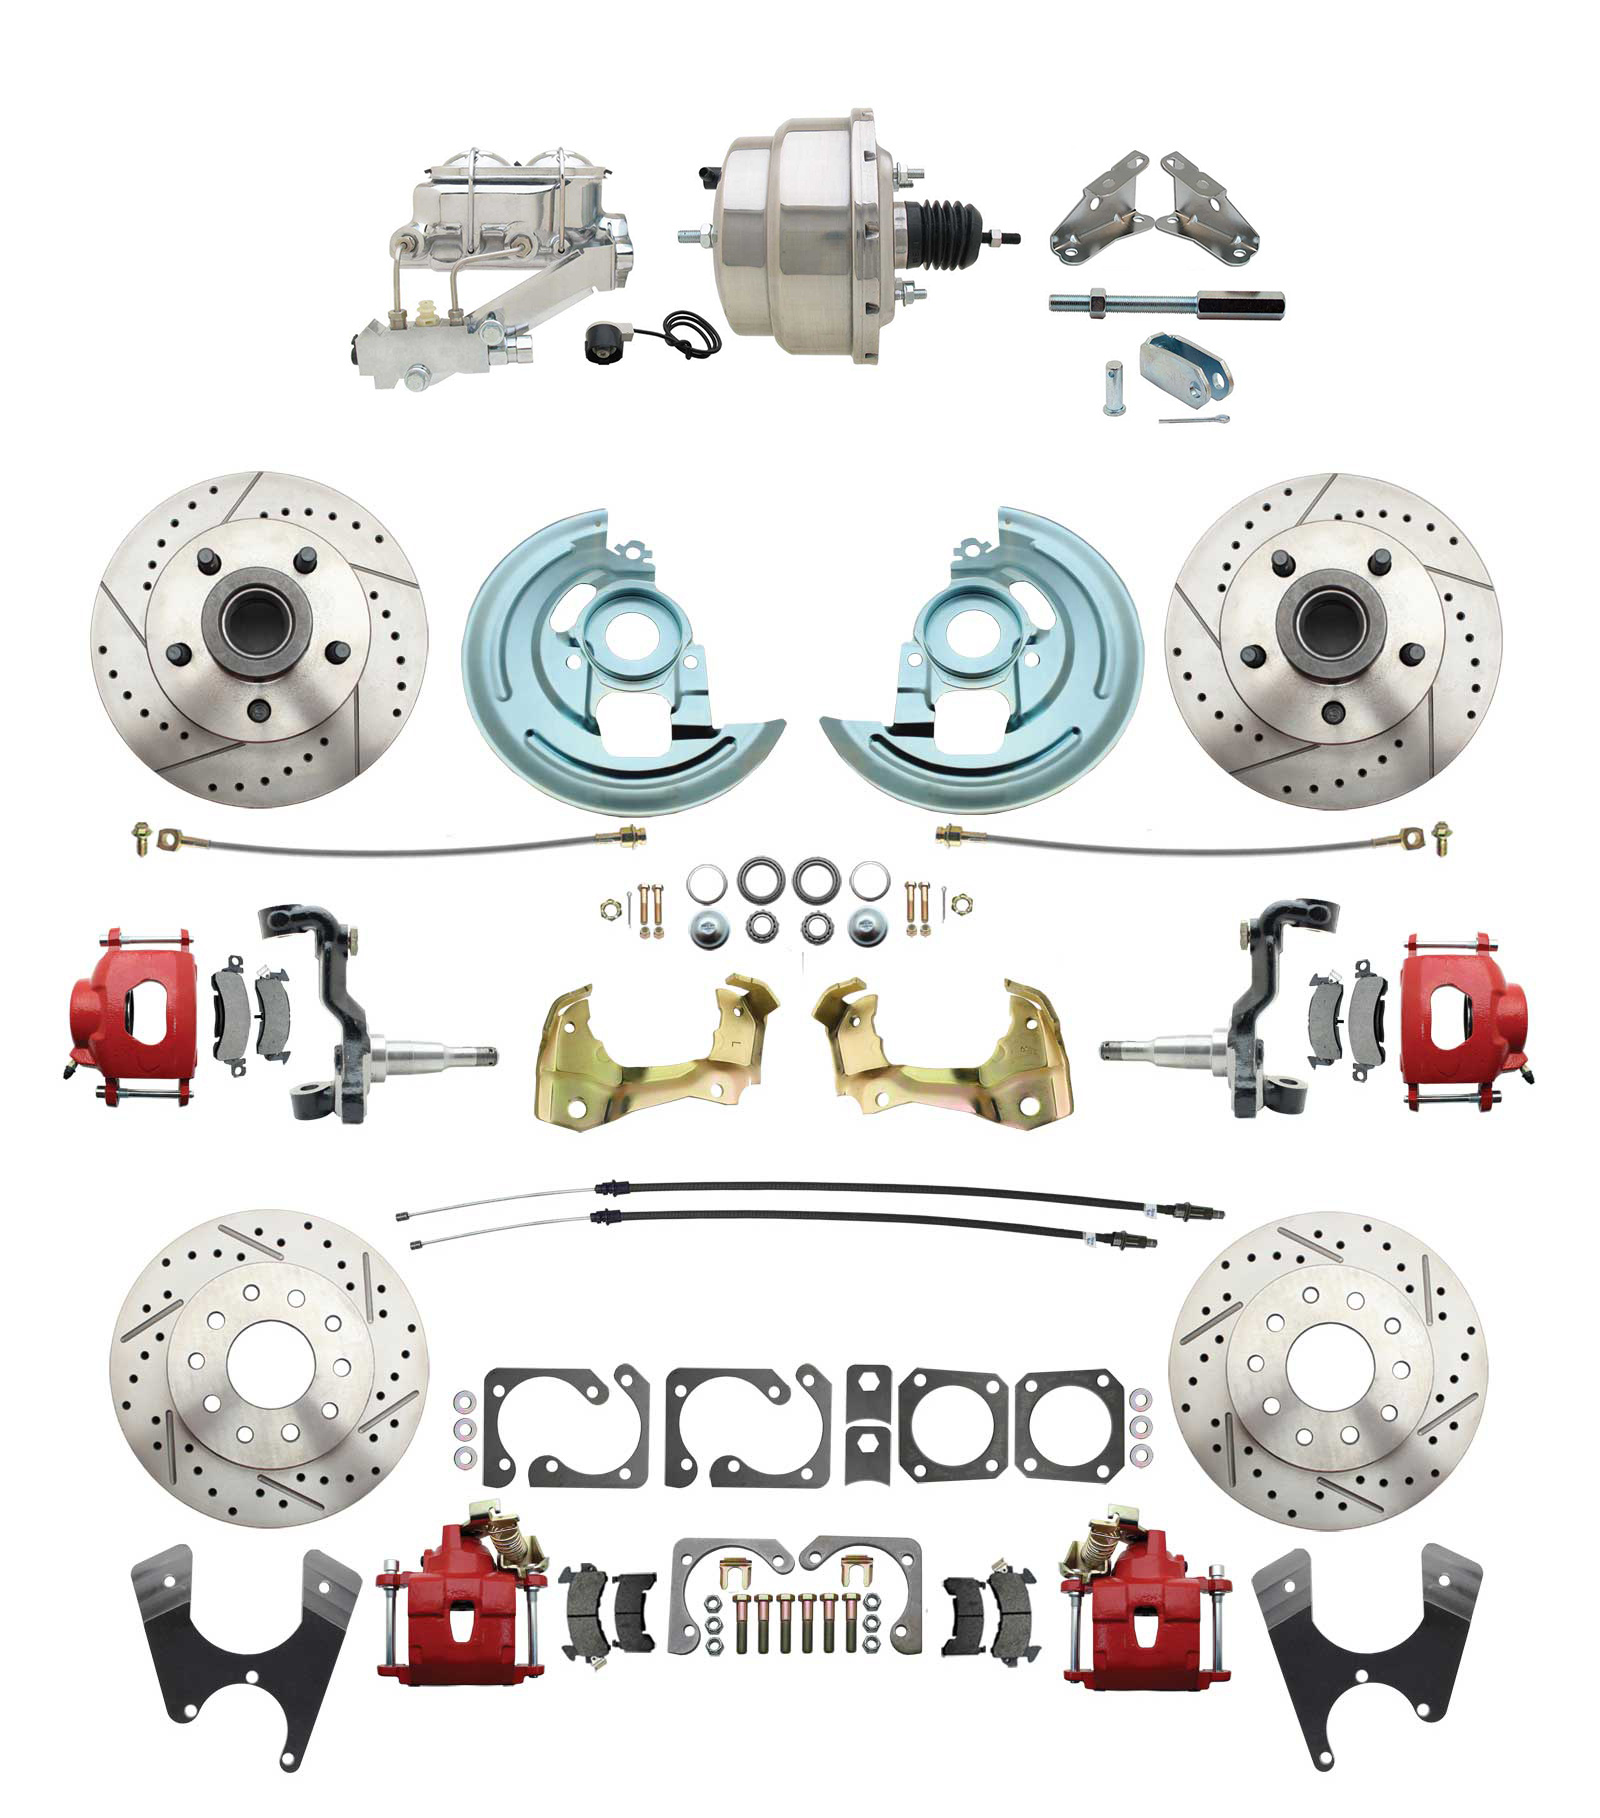 1967-1969 Camaro/ Firebird & 1968-1974 Chevy Nova Front & Rear Power Disc Brake Conversion Kit Drilled & Slotted & Powder Coated Red Calipers Rotors W/ 8 Dual Chrome Booster Kit